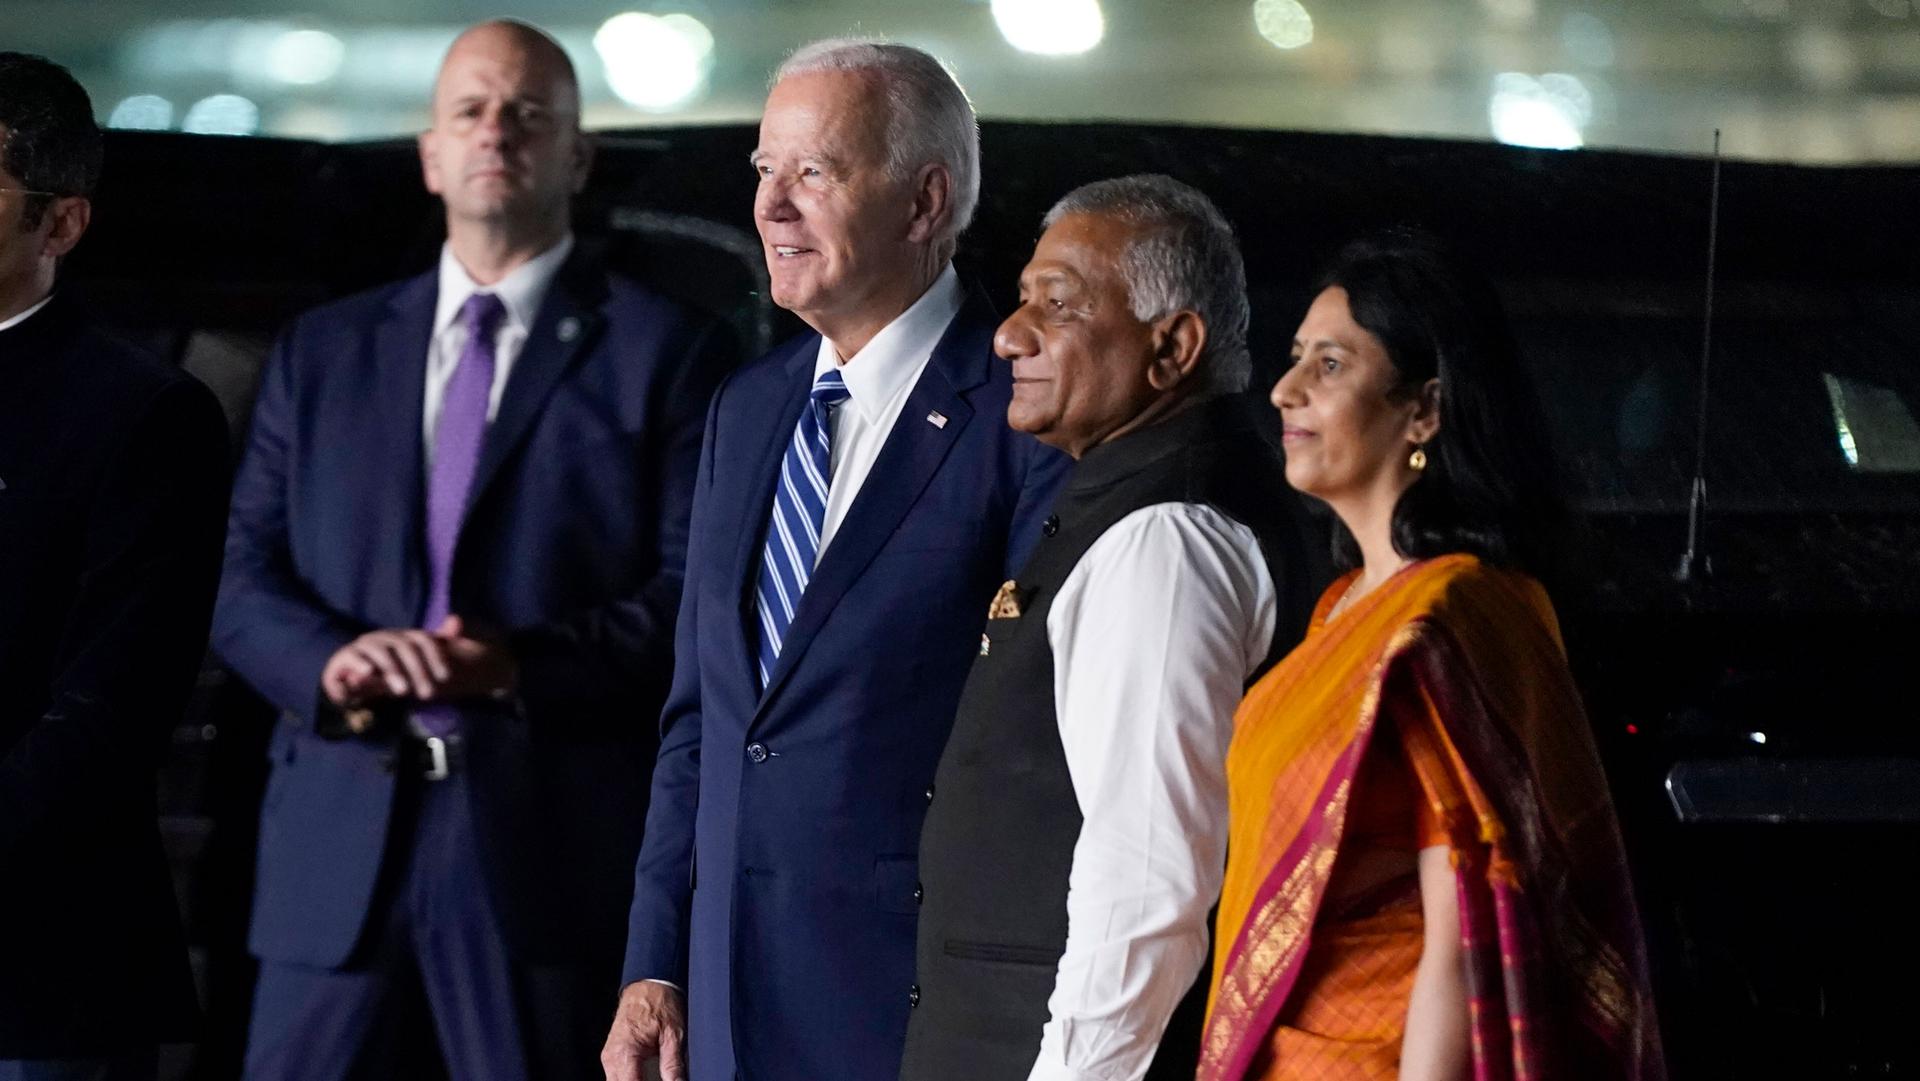 President Joe Biden watches a group of dancers alongside other leaders in India at night 